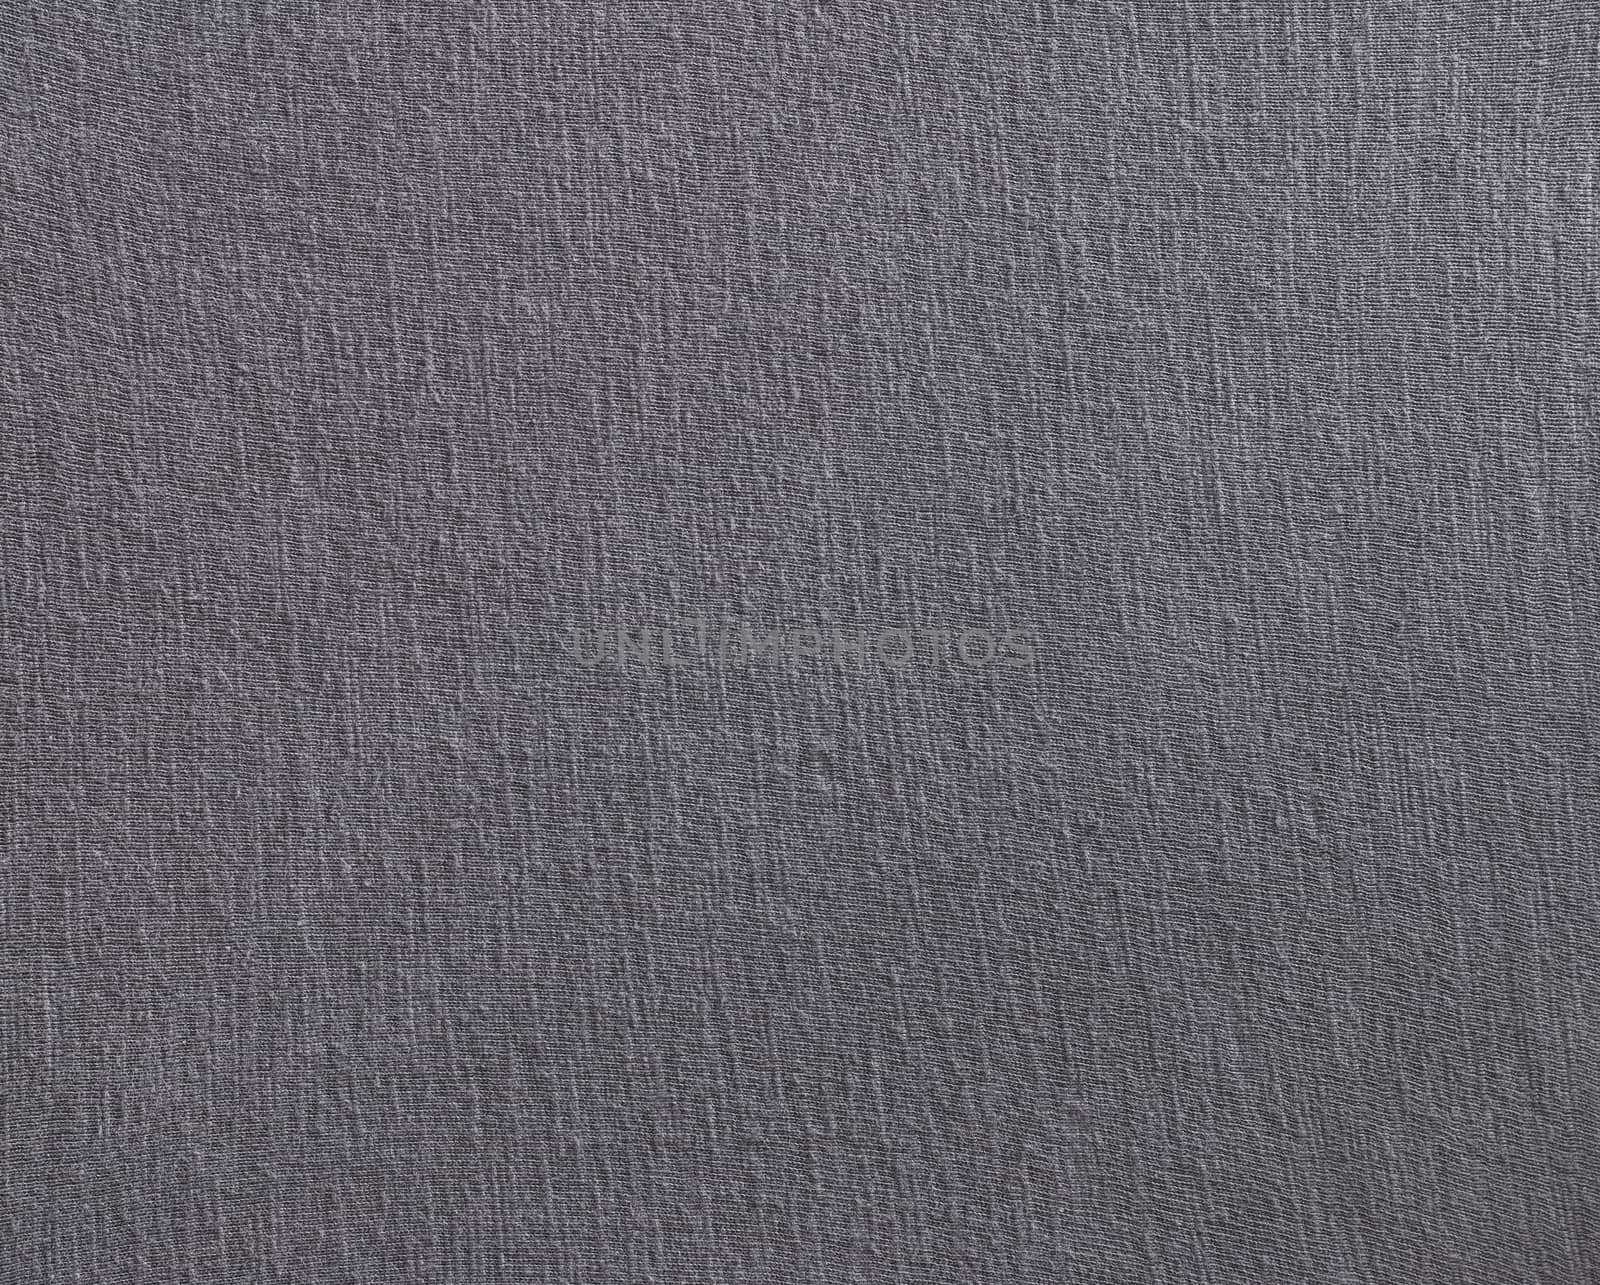 Gray Cloth texture background